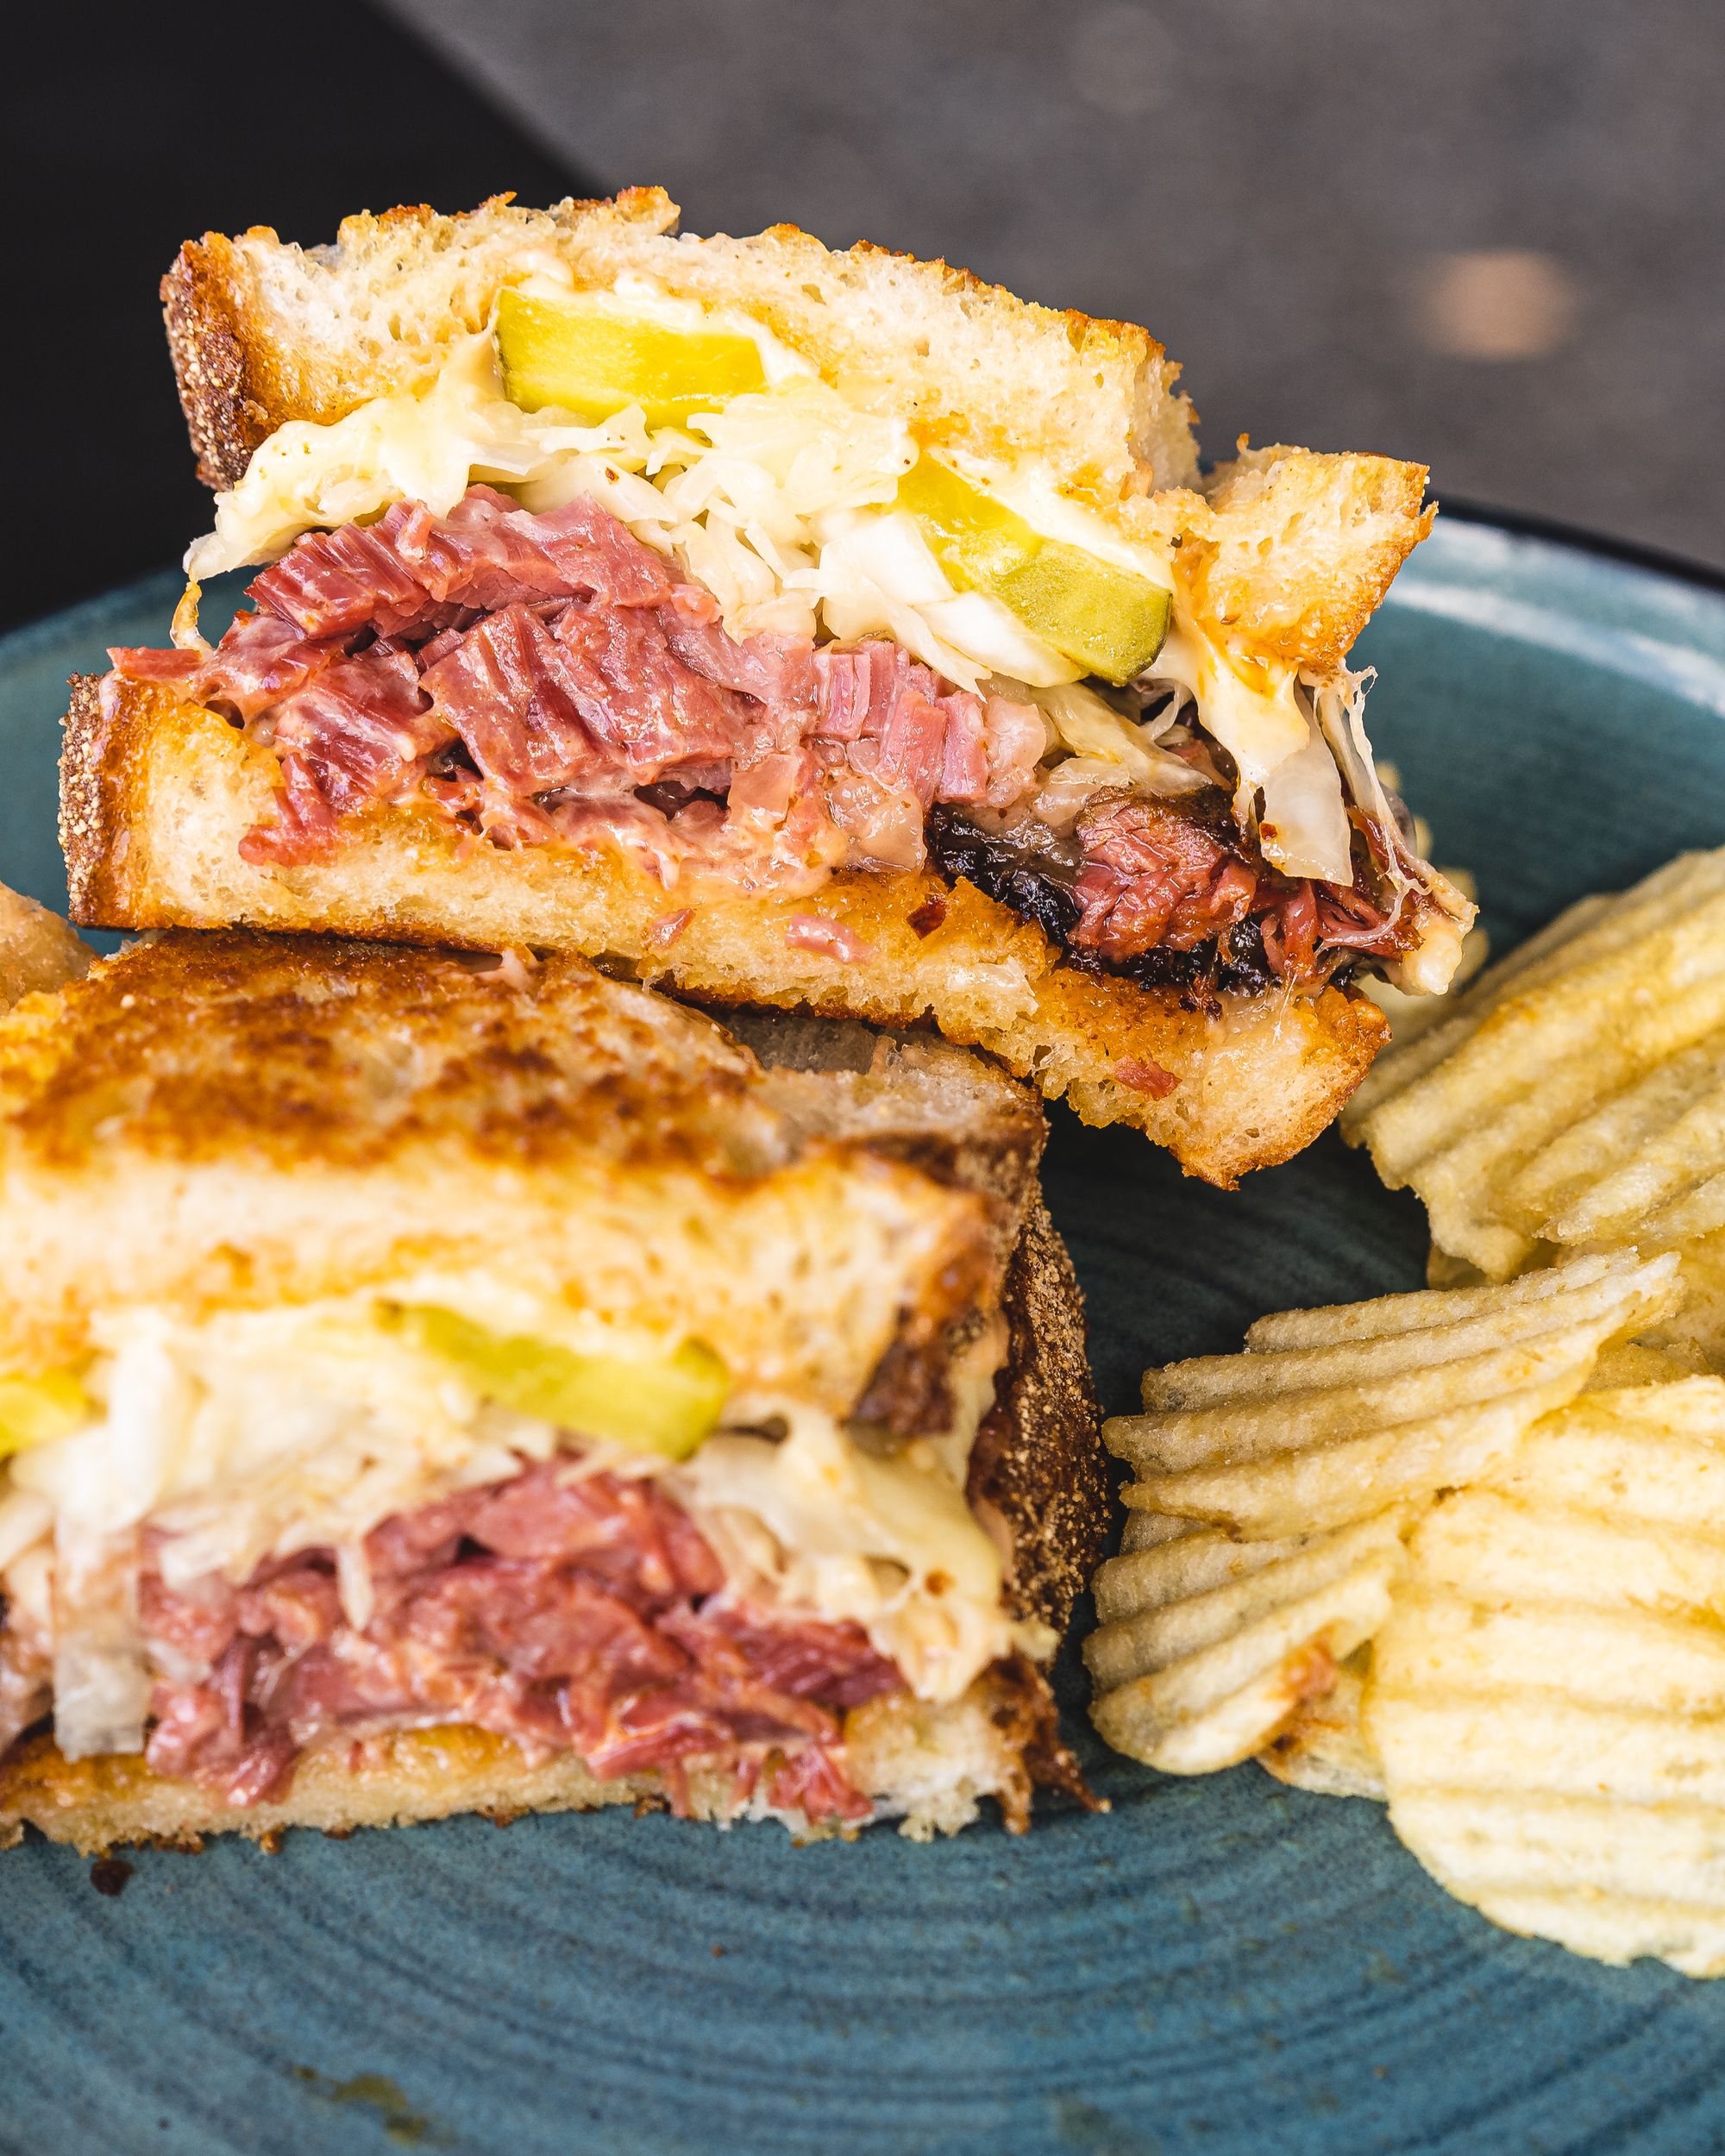 Close up of Reuben sandwich with pastrami, cheese, pickle and a side of crisps